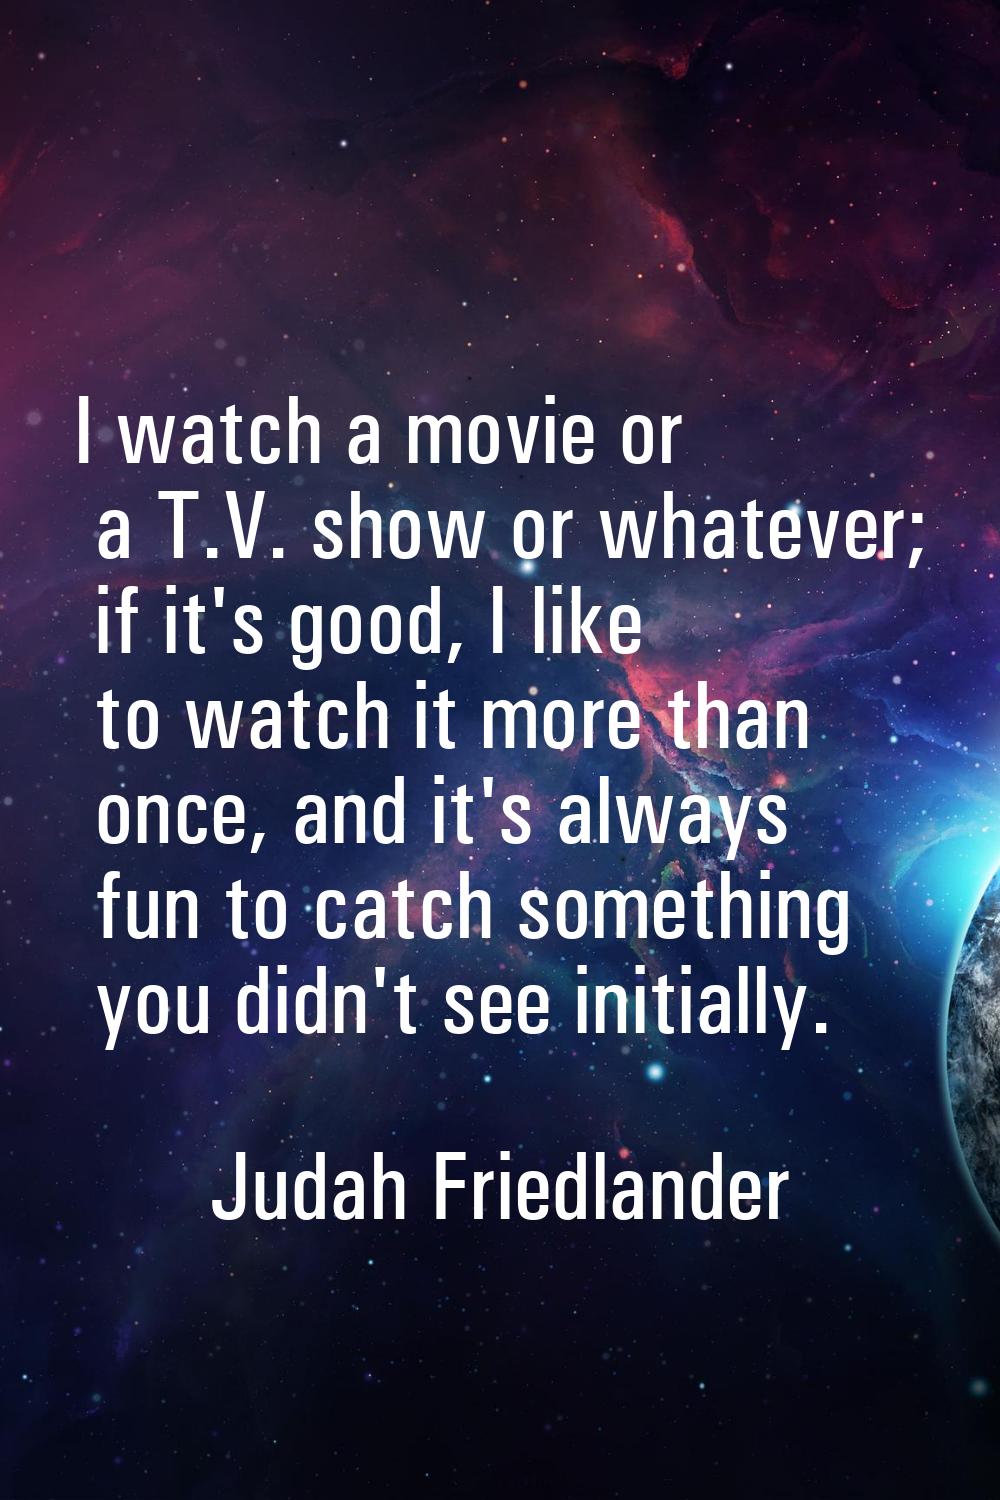 I watch a movie or a T.V. show or whatever; if it's good, I like to watch it more than once, and it